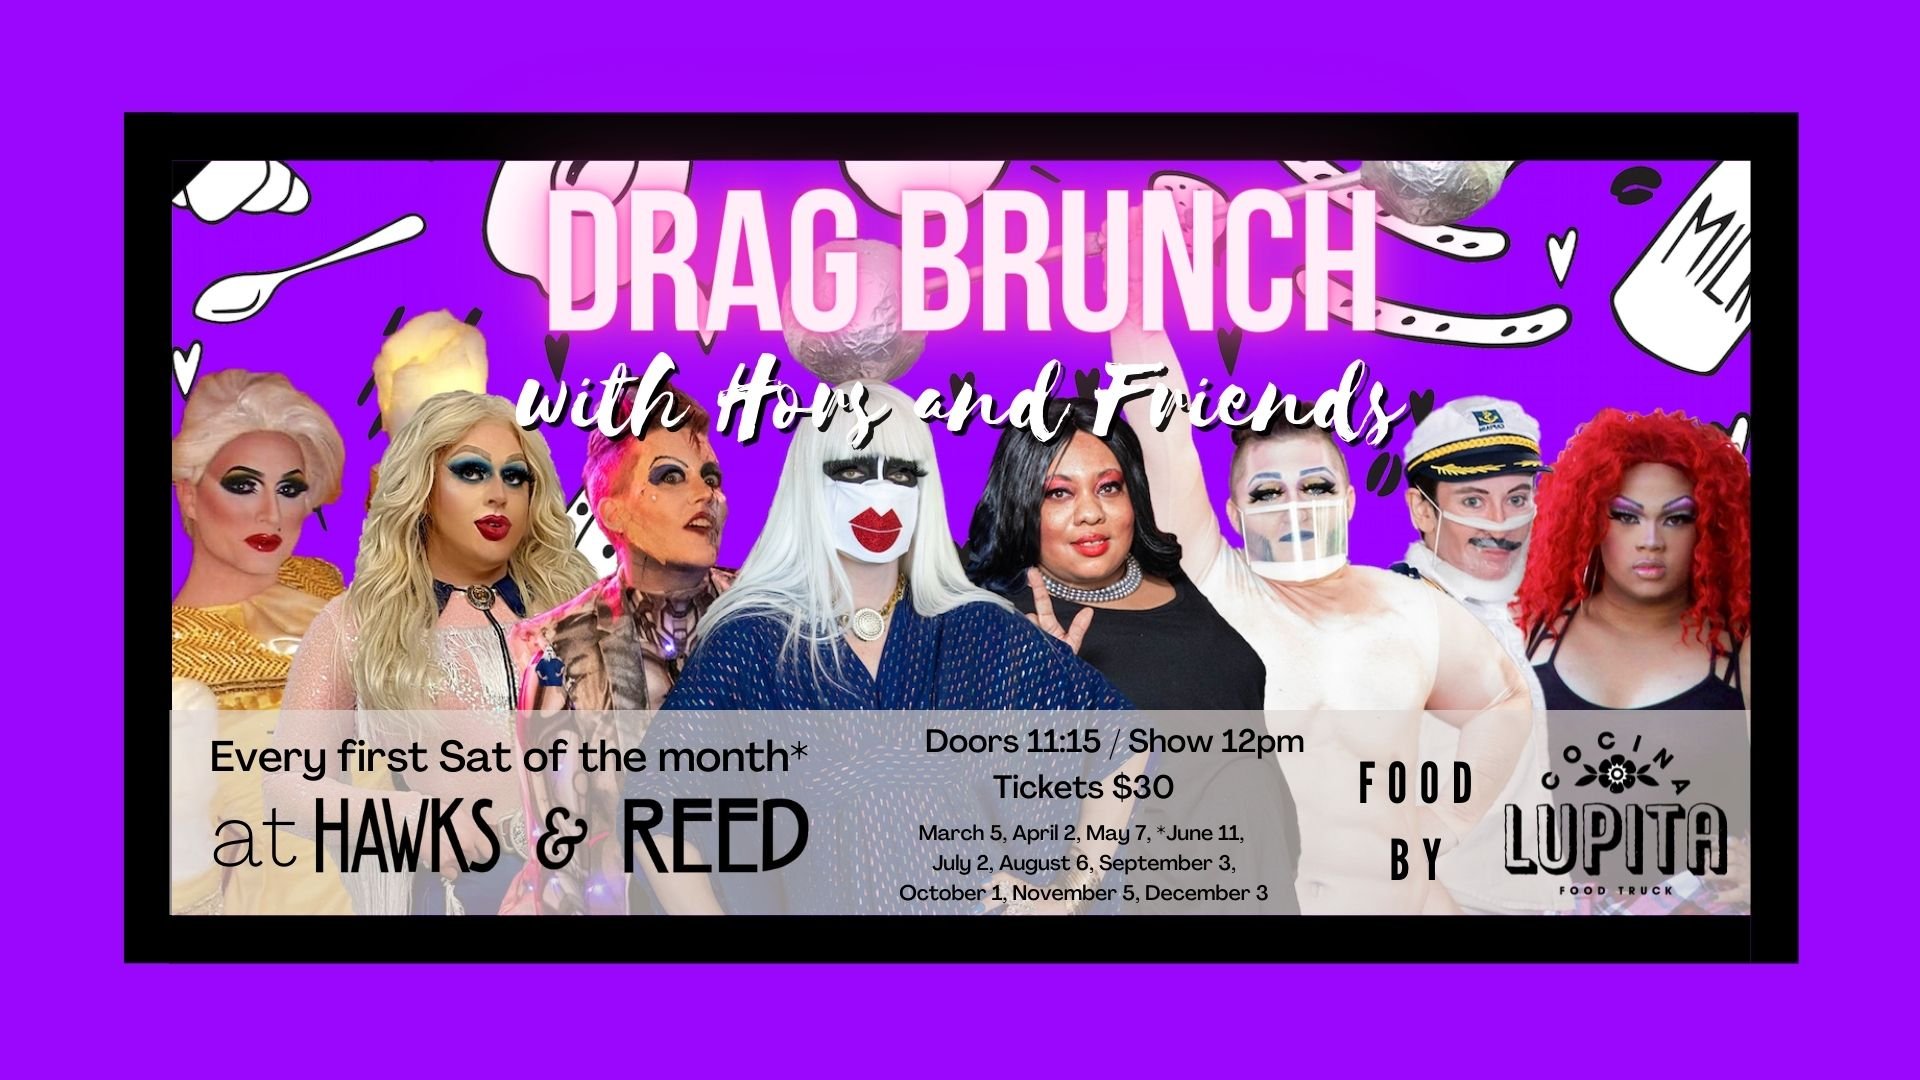 Drag Brunch with Hors and Friends at Hawks and Reed – Food by Cocina Lupita